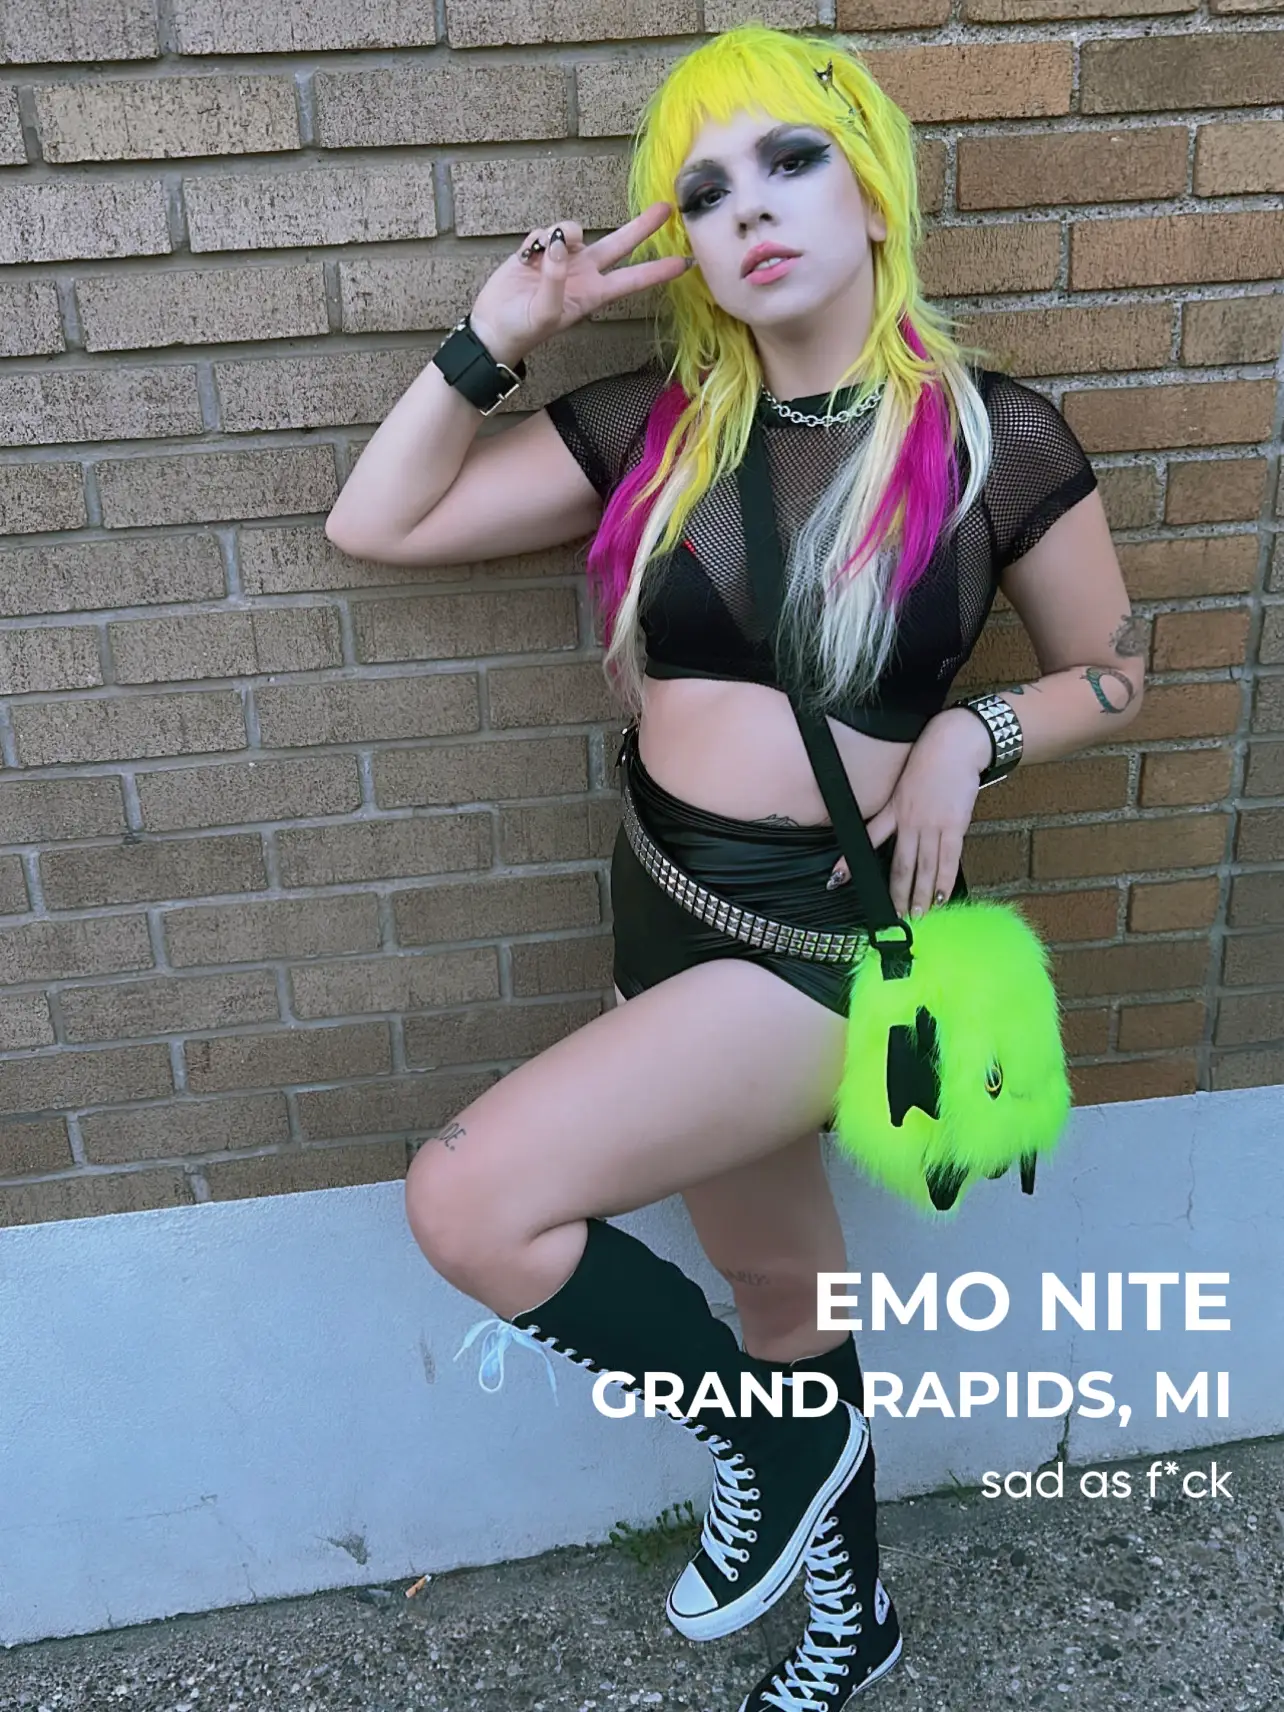 World's most emo girl transforms herself with massive elf ears, face  piercings and tattoos – The US Sun